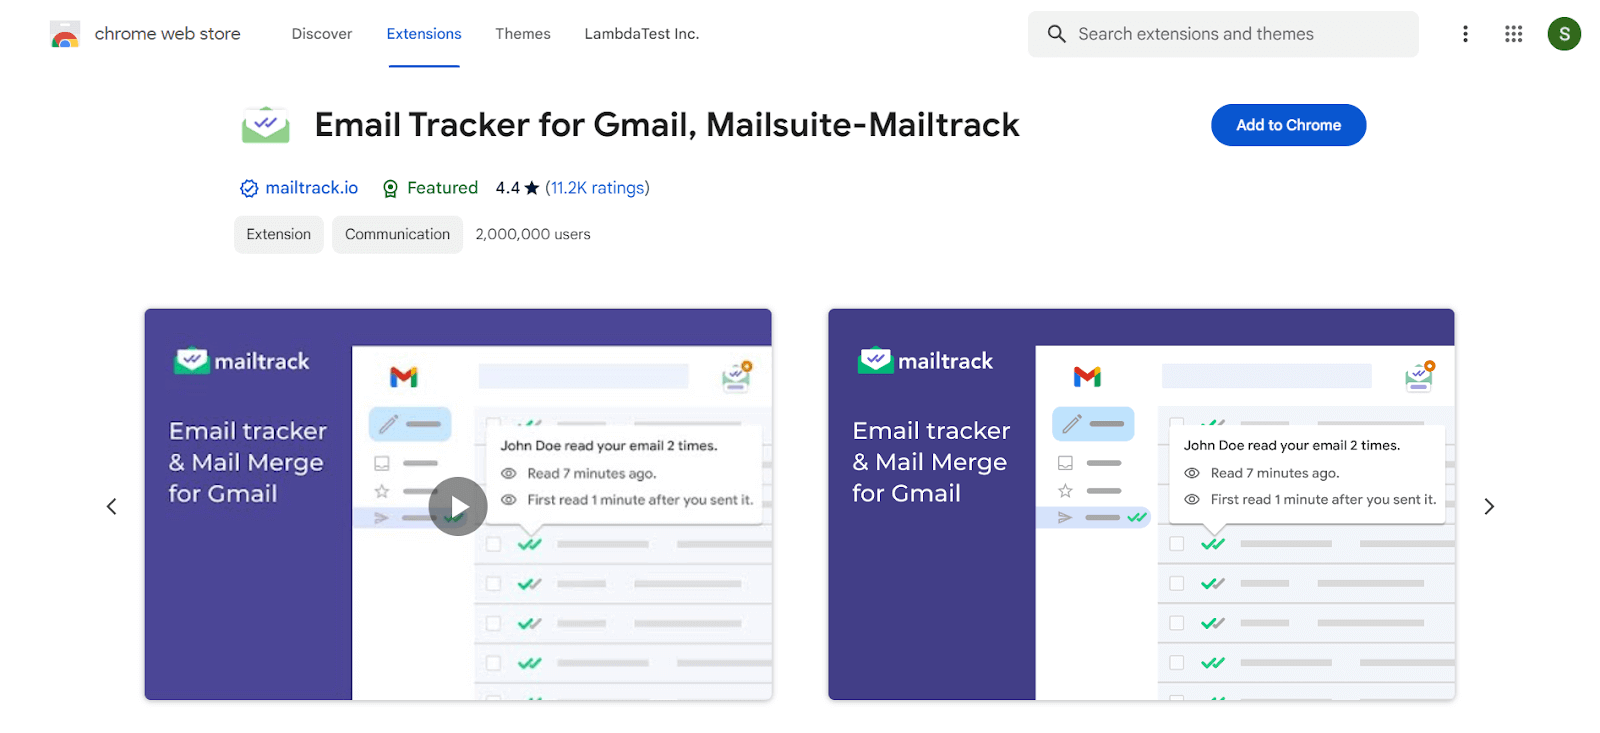 Email Tracker for Gmail, Mailsuite-Mailtrack